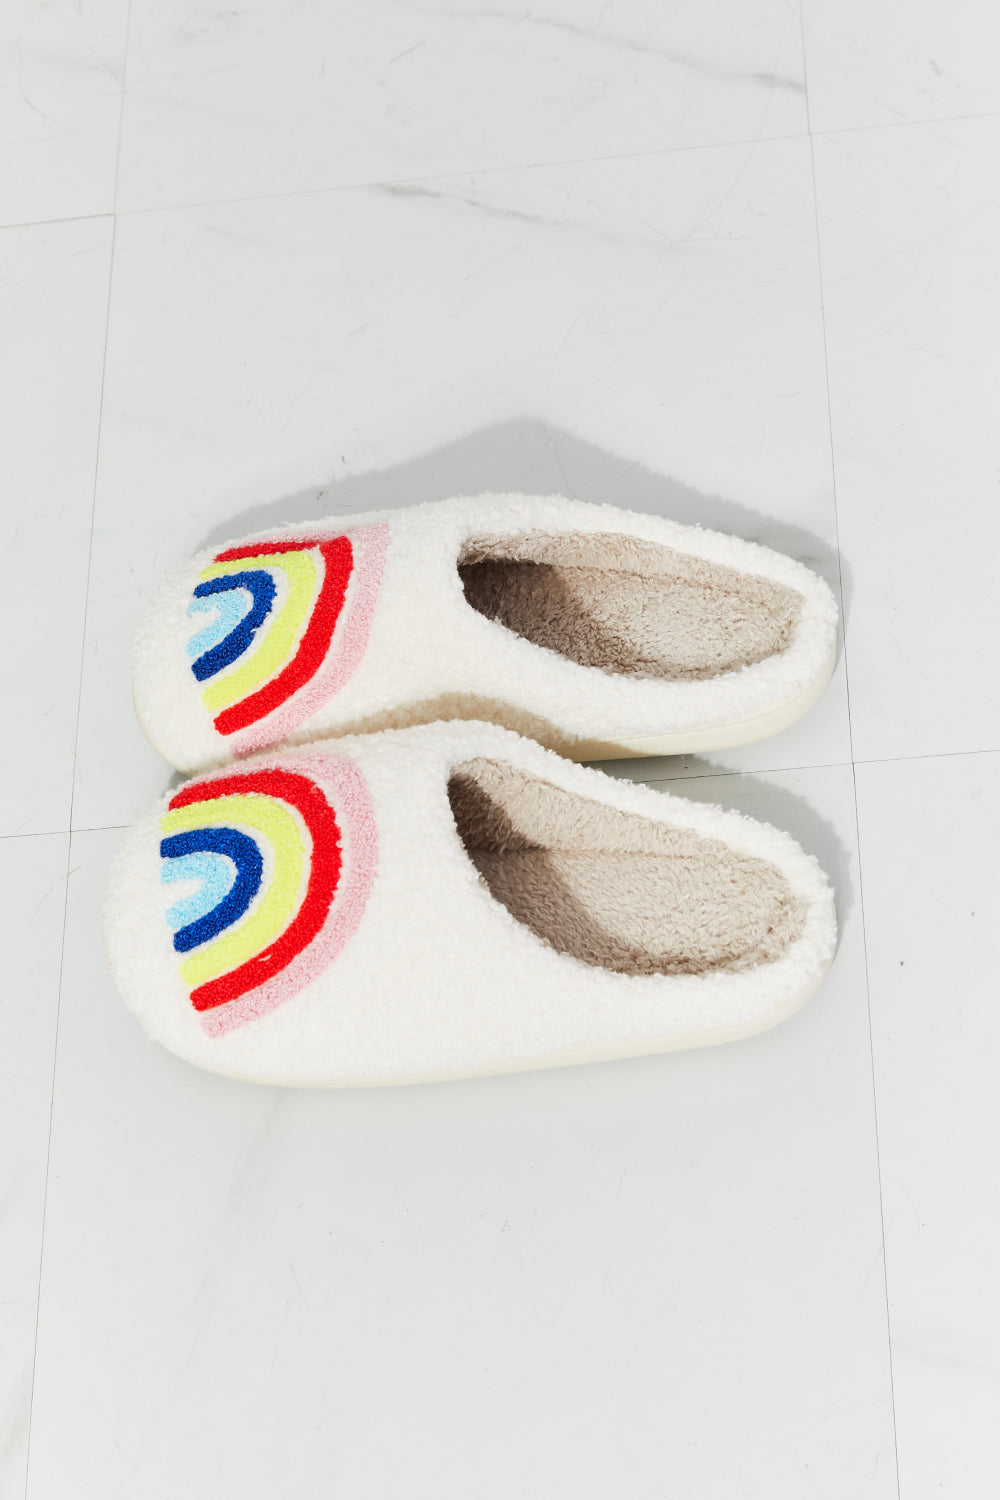 MMShoes Rainbow Fuzzy Teddy Bear Plush Slide On Comfy Slippers Multicolor on White